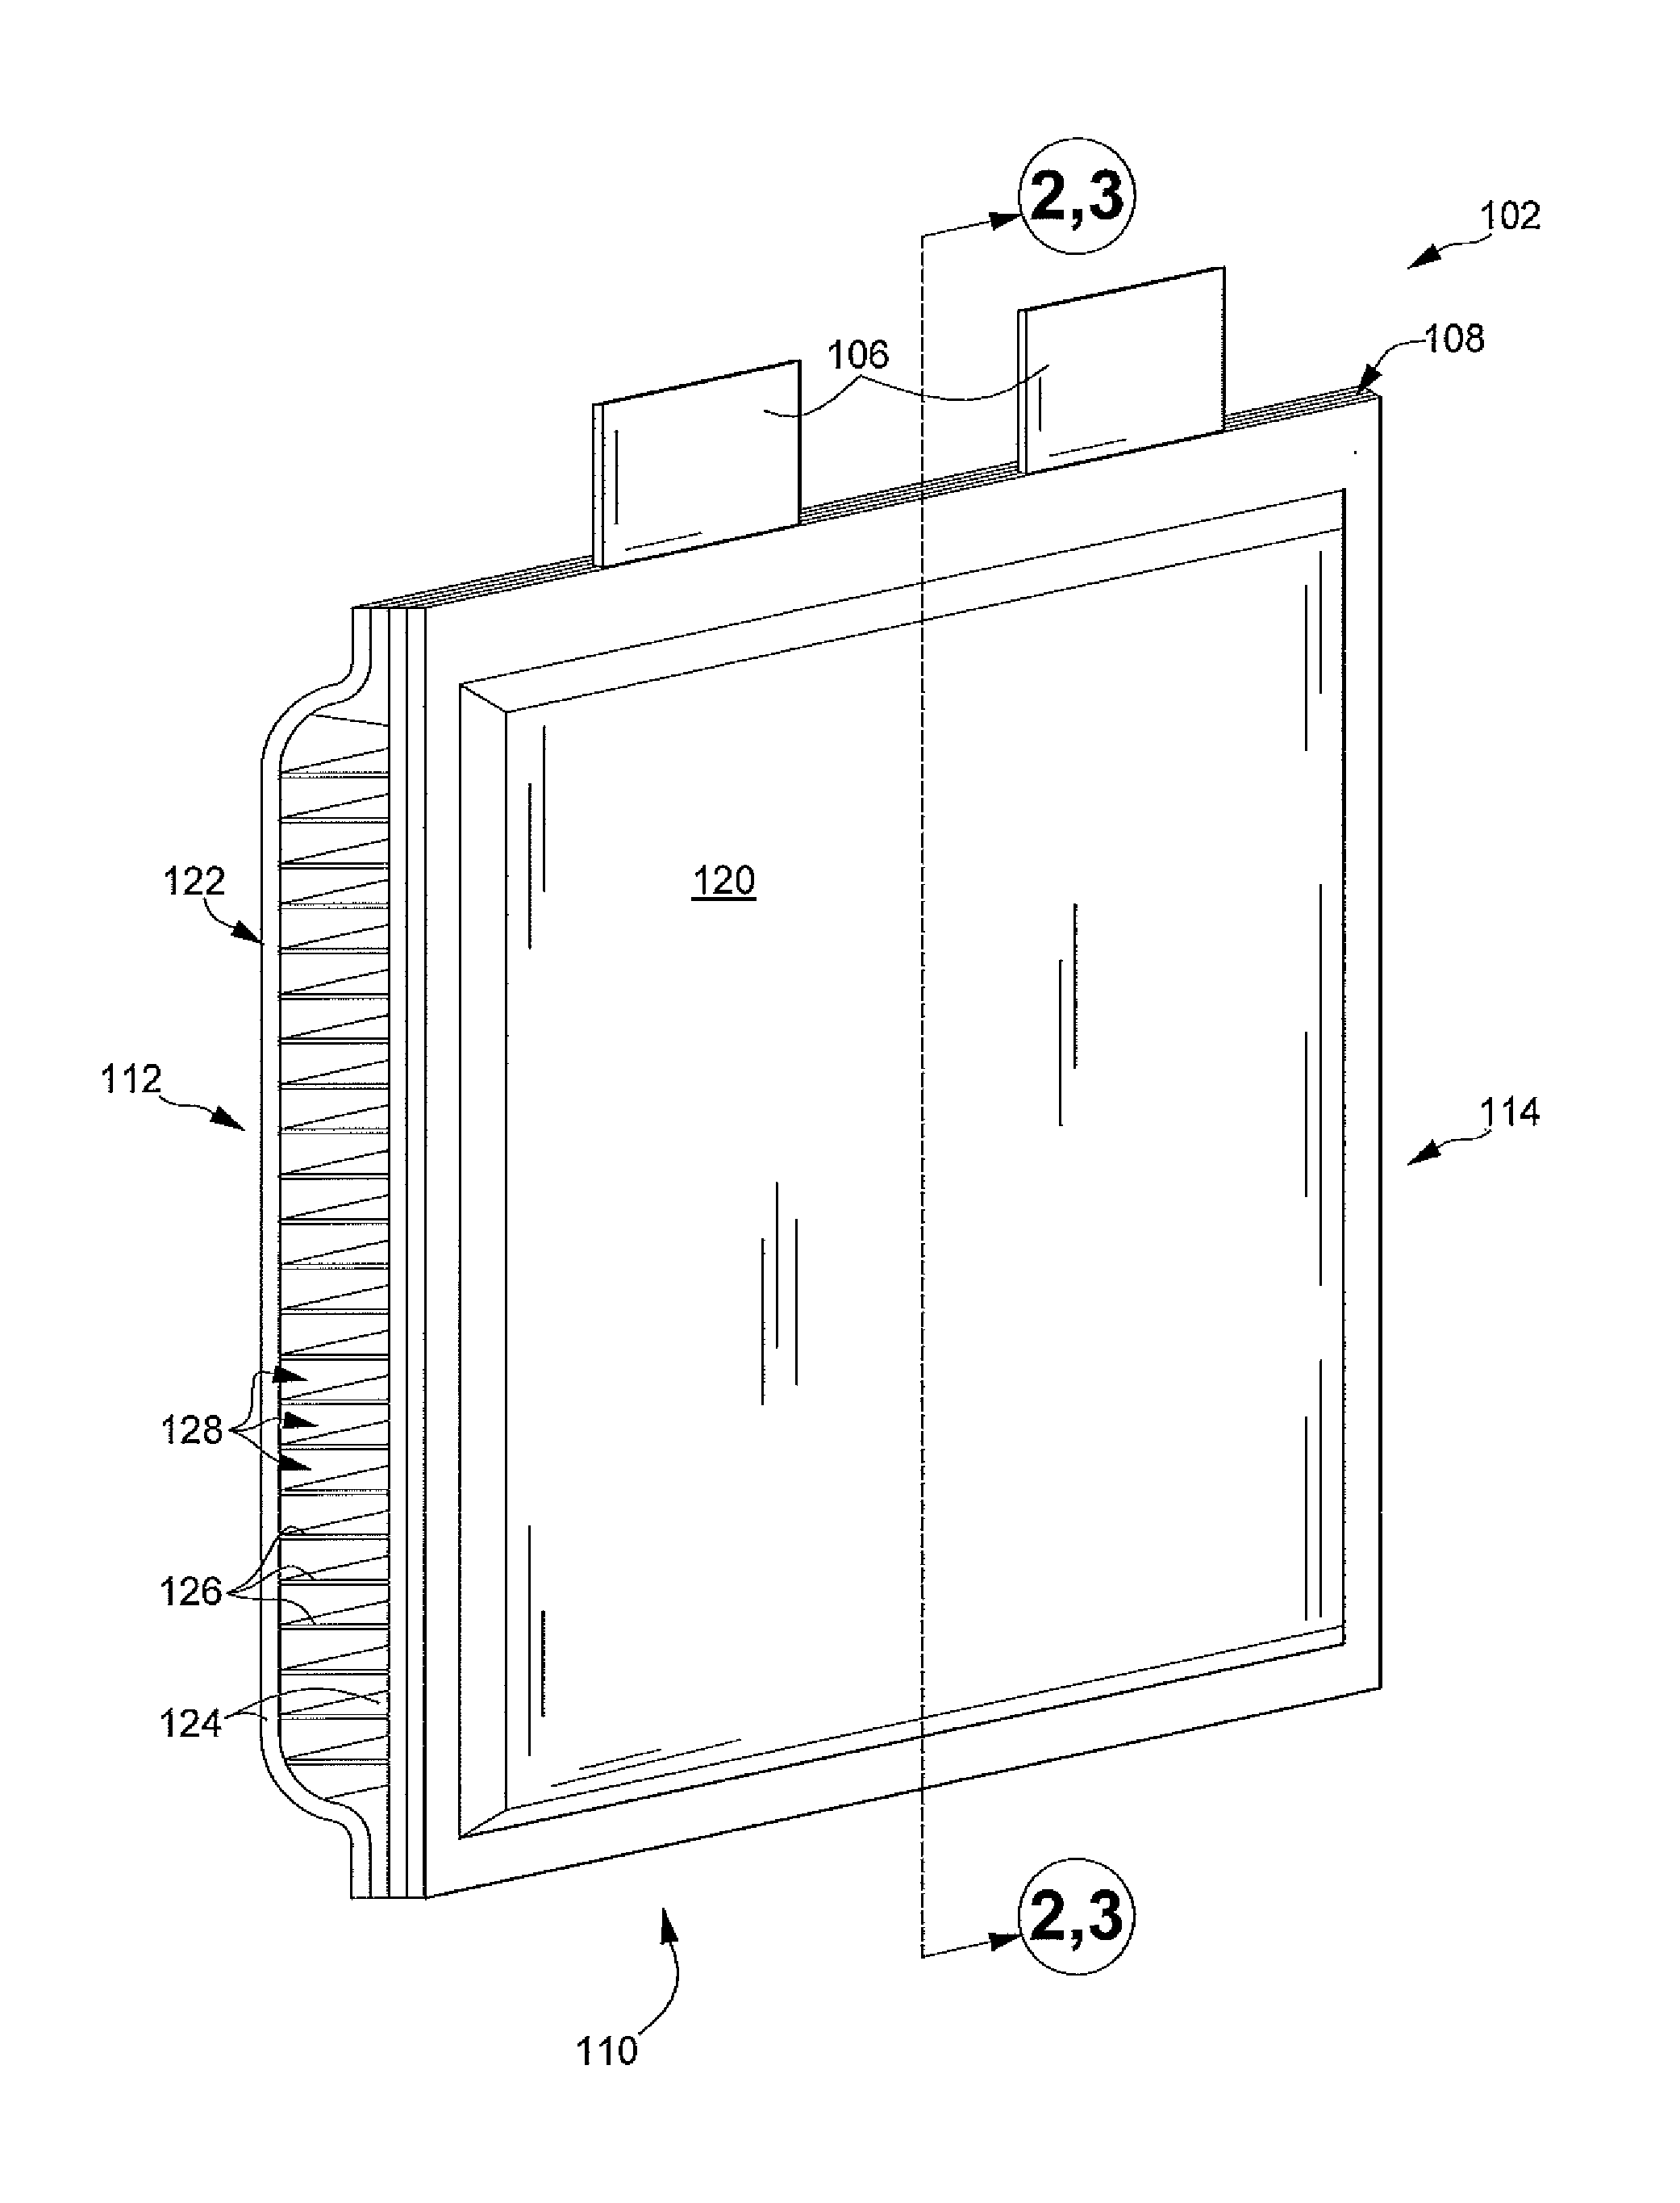 Prismatic battery cell with integrated cooling passages and assembly frame